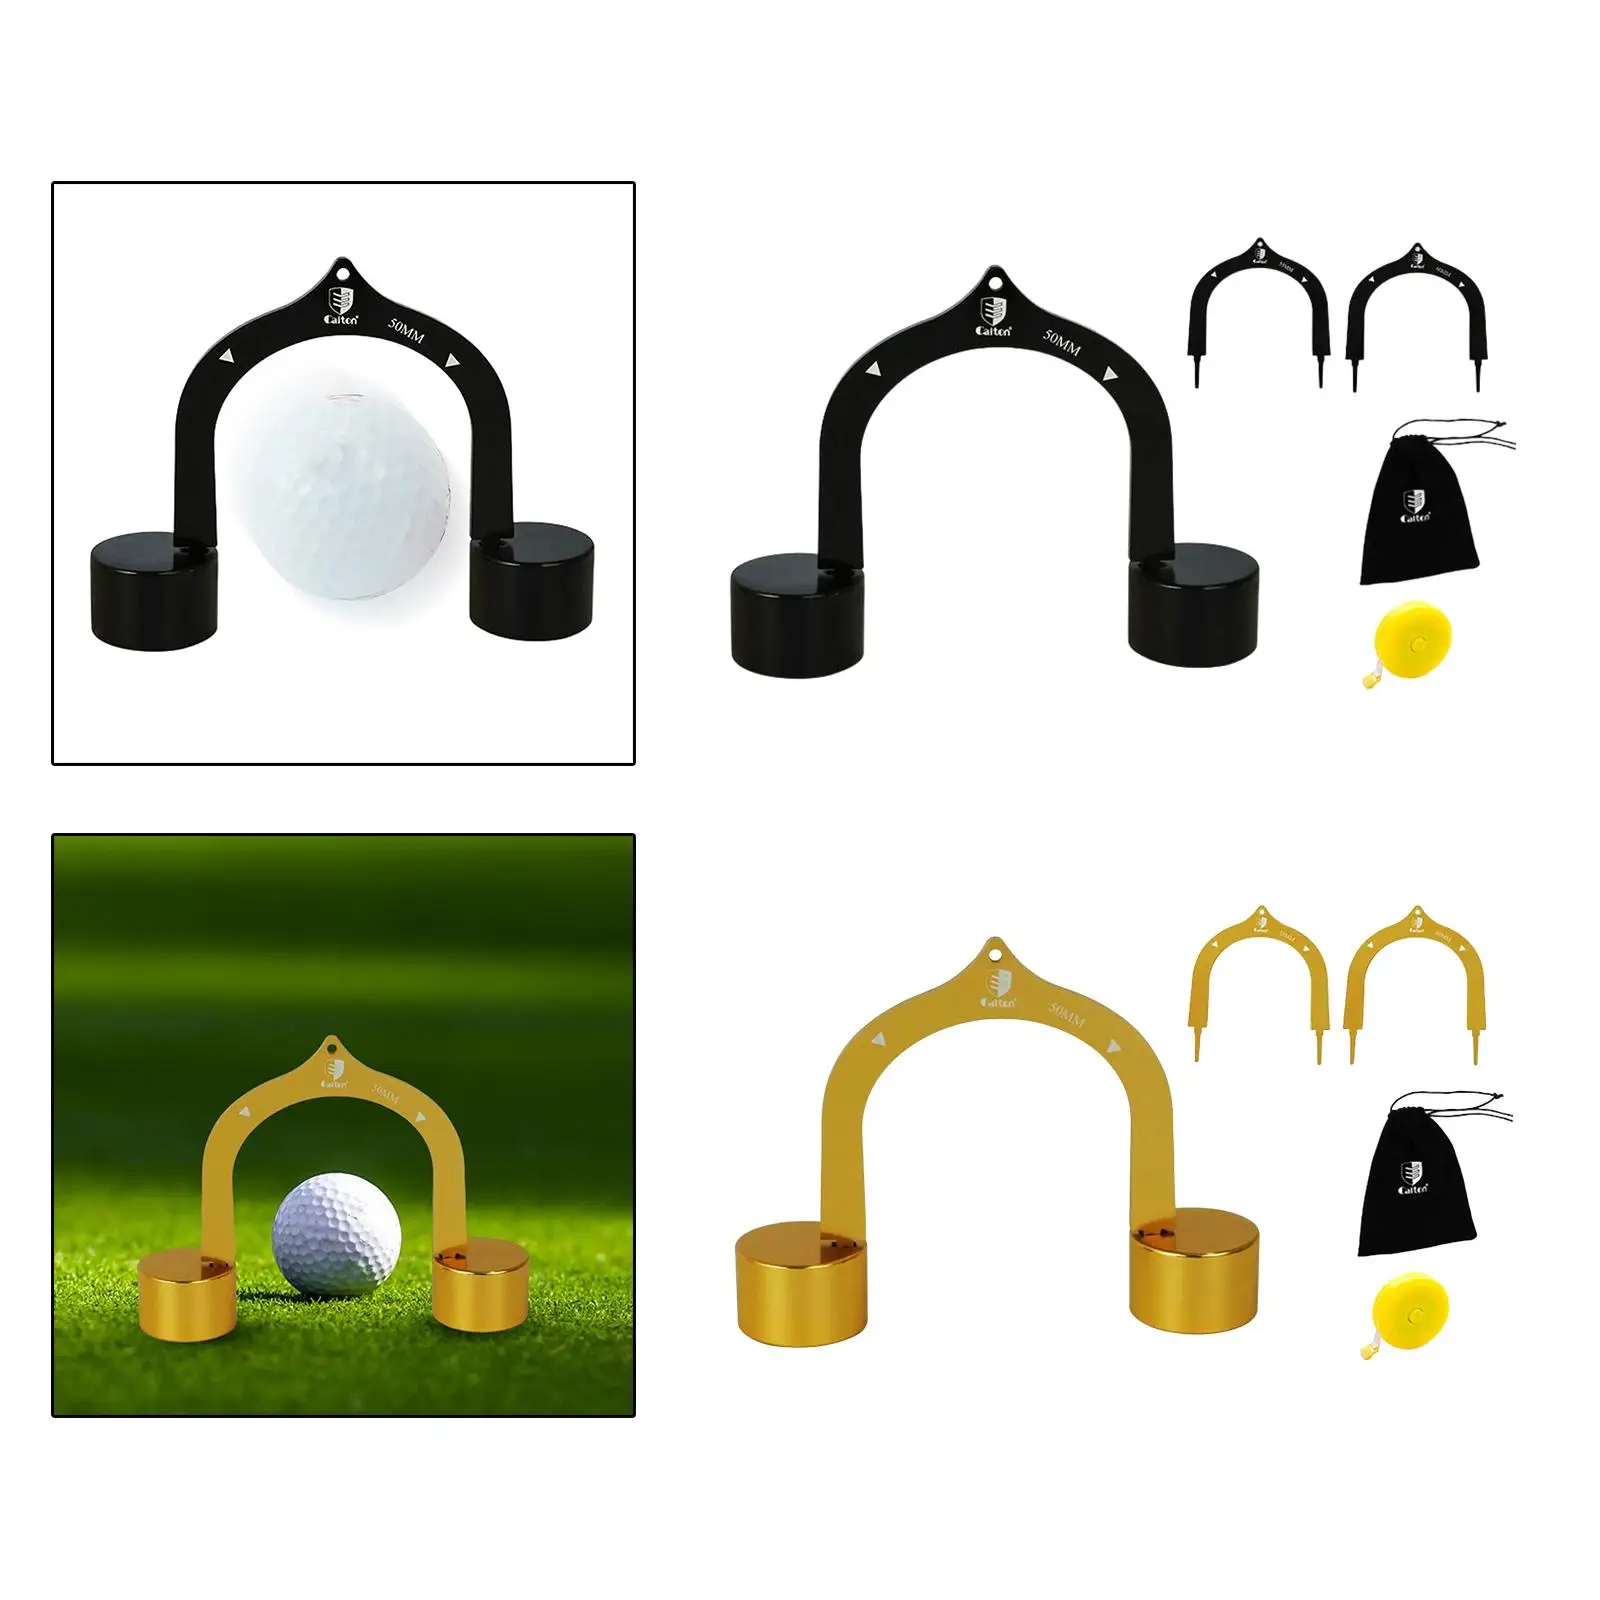 Golf Putting Gates Goal Gate Training Aid Aluminum Alloy Metal Precision Practice Supplies with Carry Bag Golf Accessories